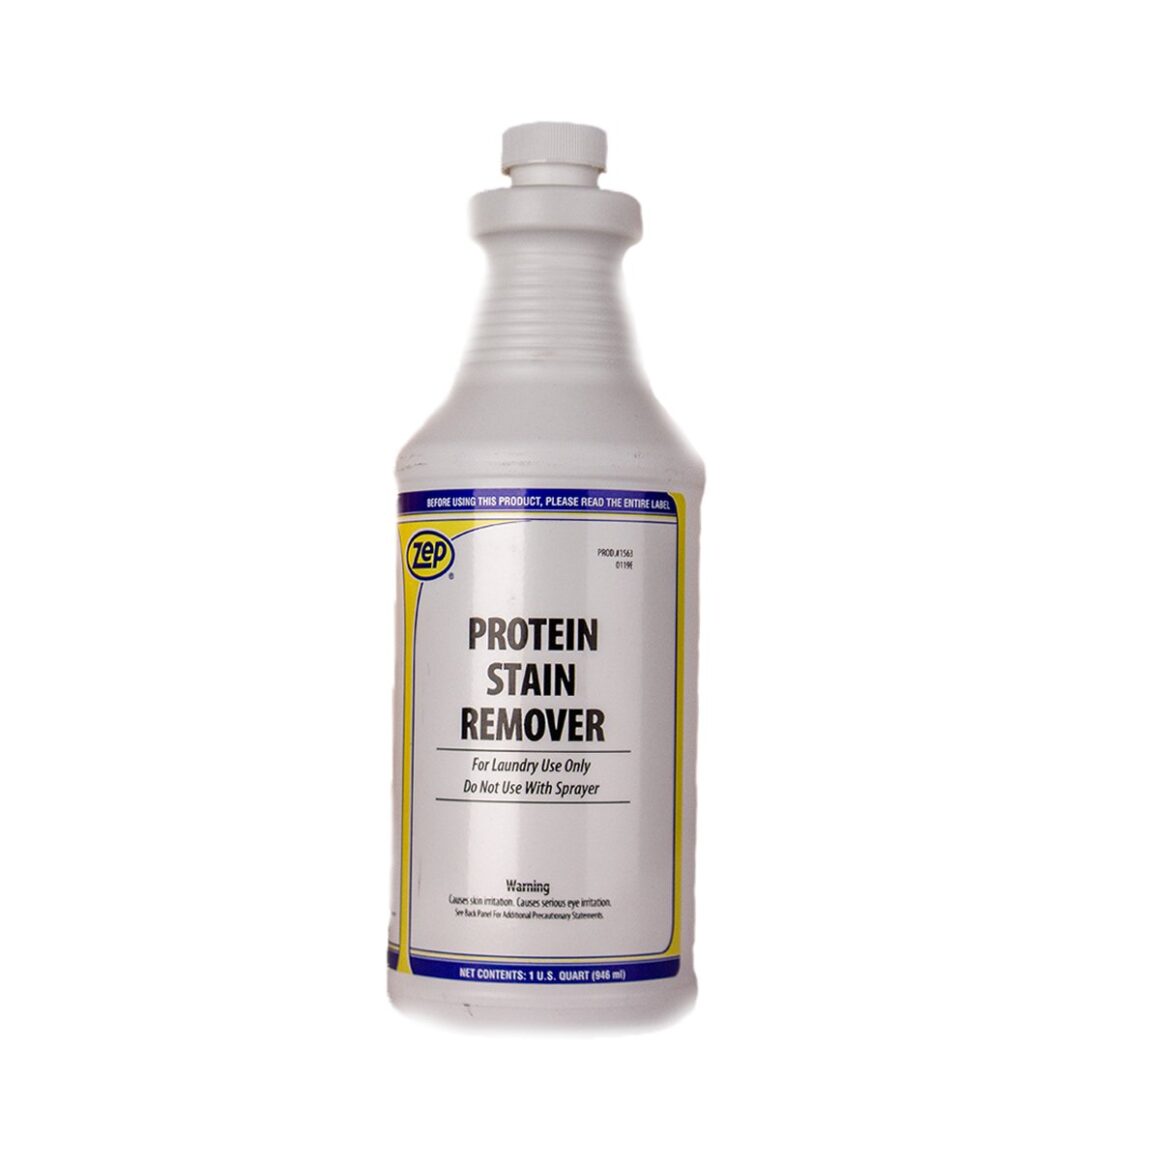 Protein Stain Remover